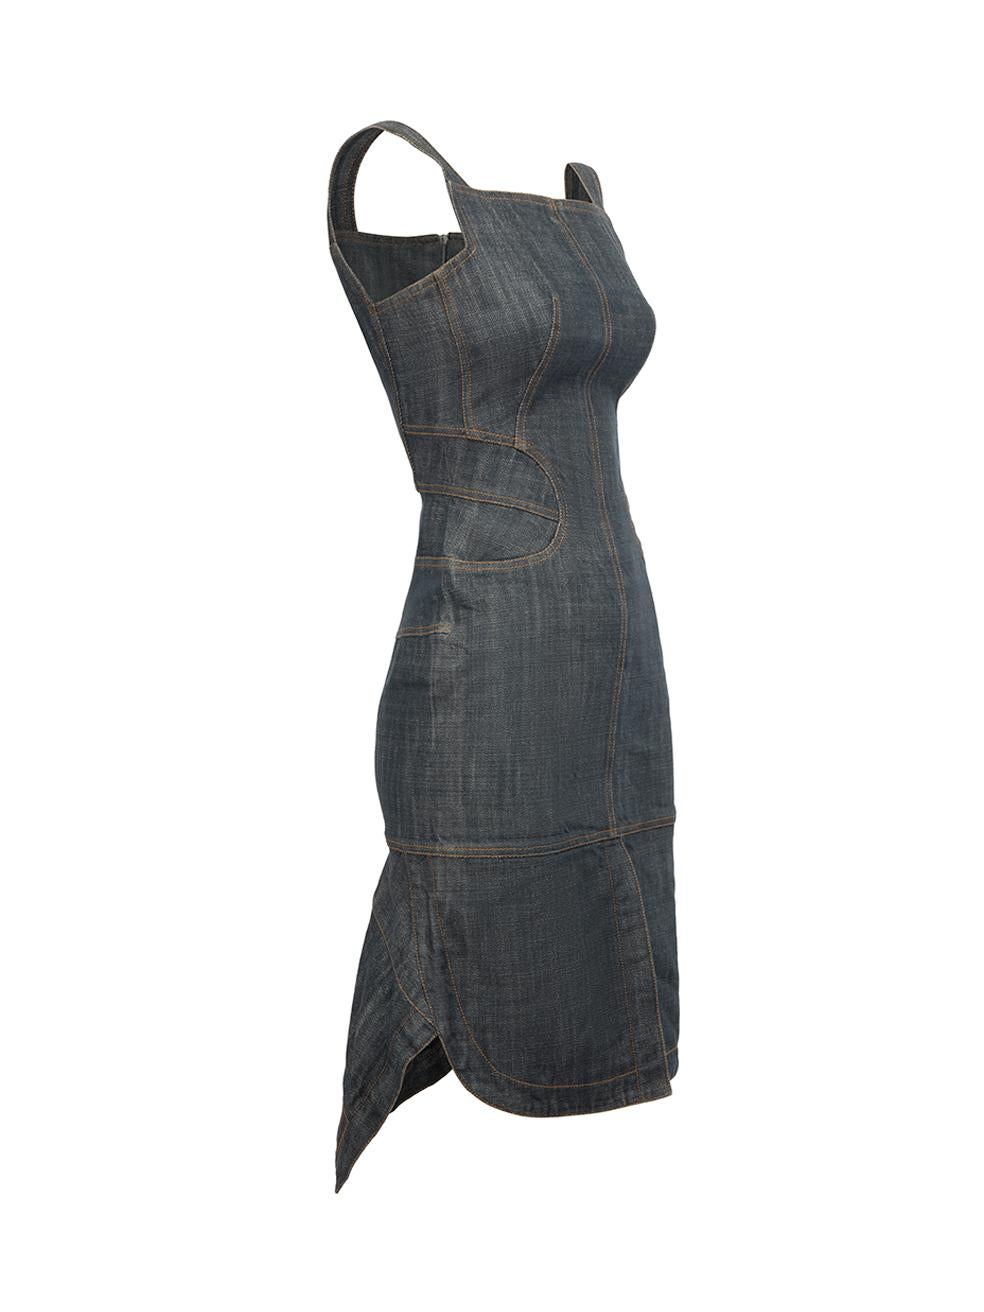 CONDITION is Very good. Minimal wear to dress is evident. Minimal wear to the back seam at the zip which has become undone on this used Alaïa designer resale item.



Details


Blue

Pinafore dress

Knee length

Sleeveless

Back zip